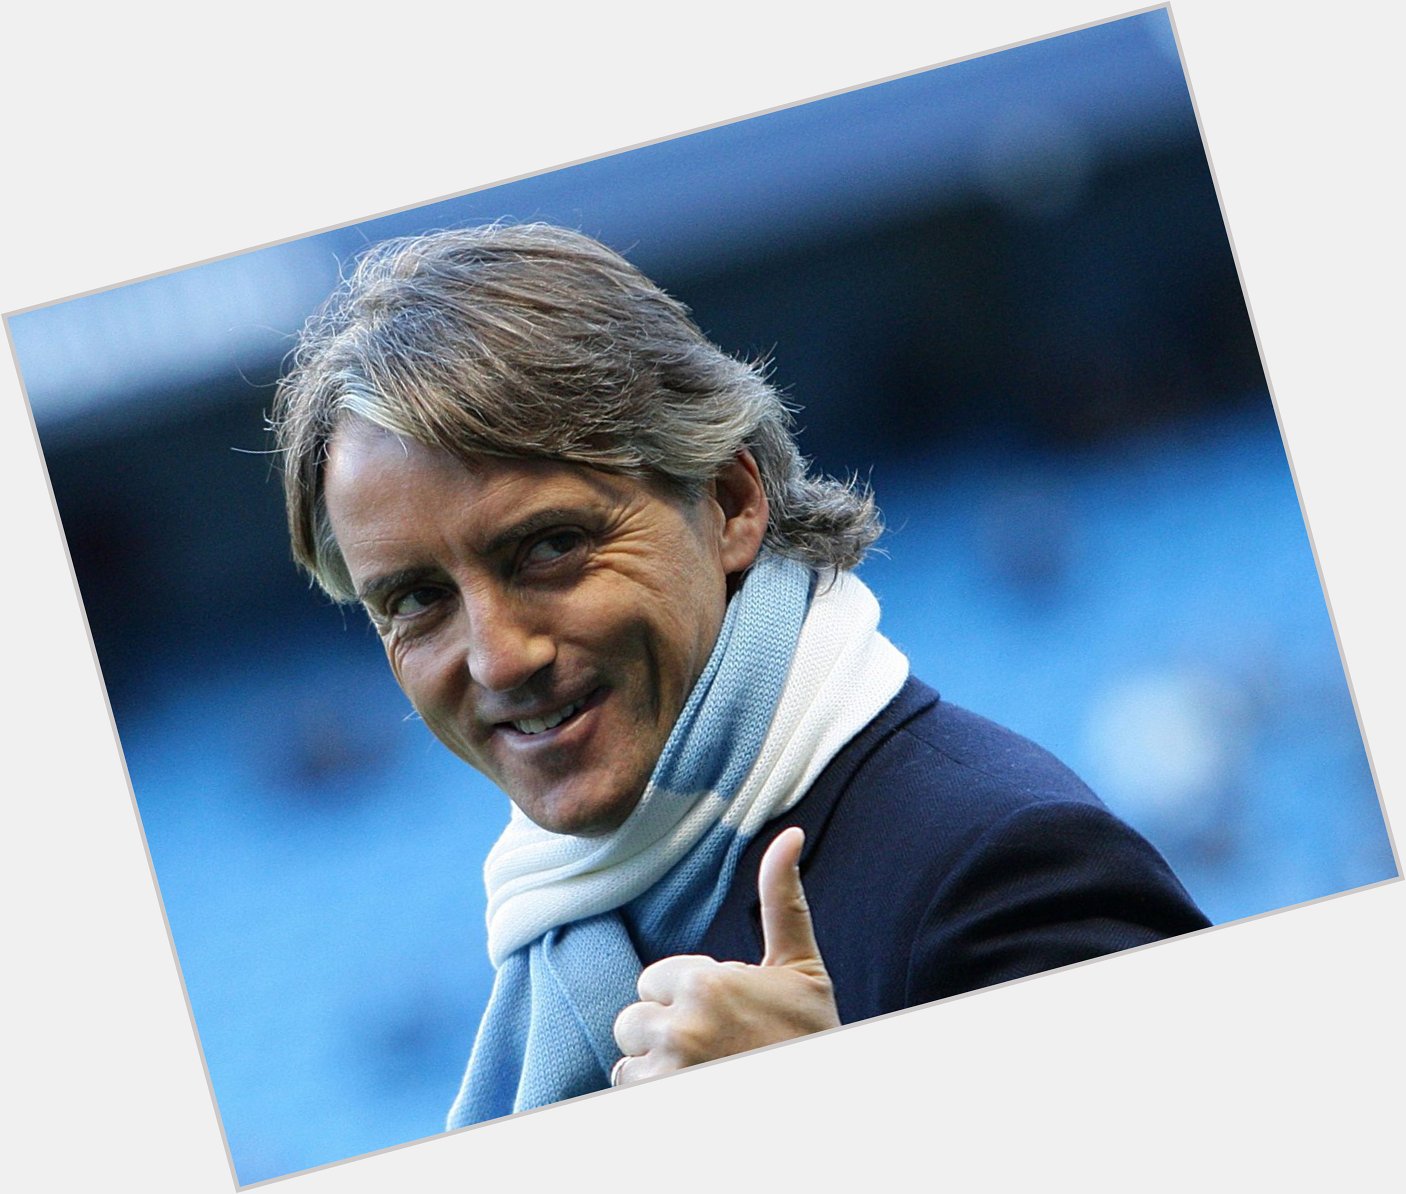 Happy birthday to former Inter Milan and Manchester City manager Roberto Mancini, who turns 53 today! 